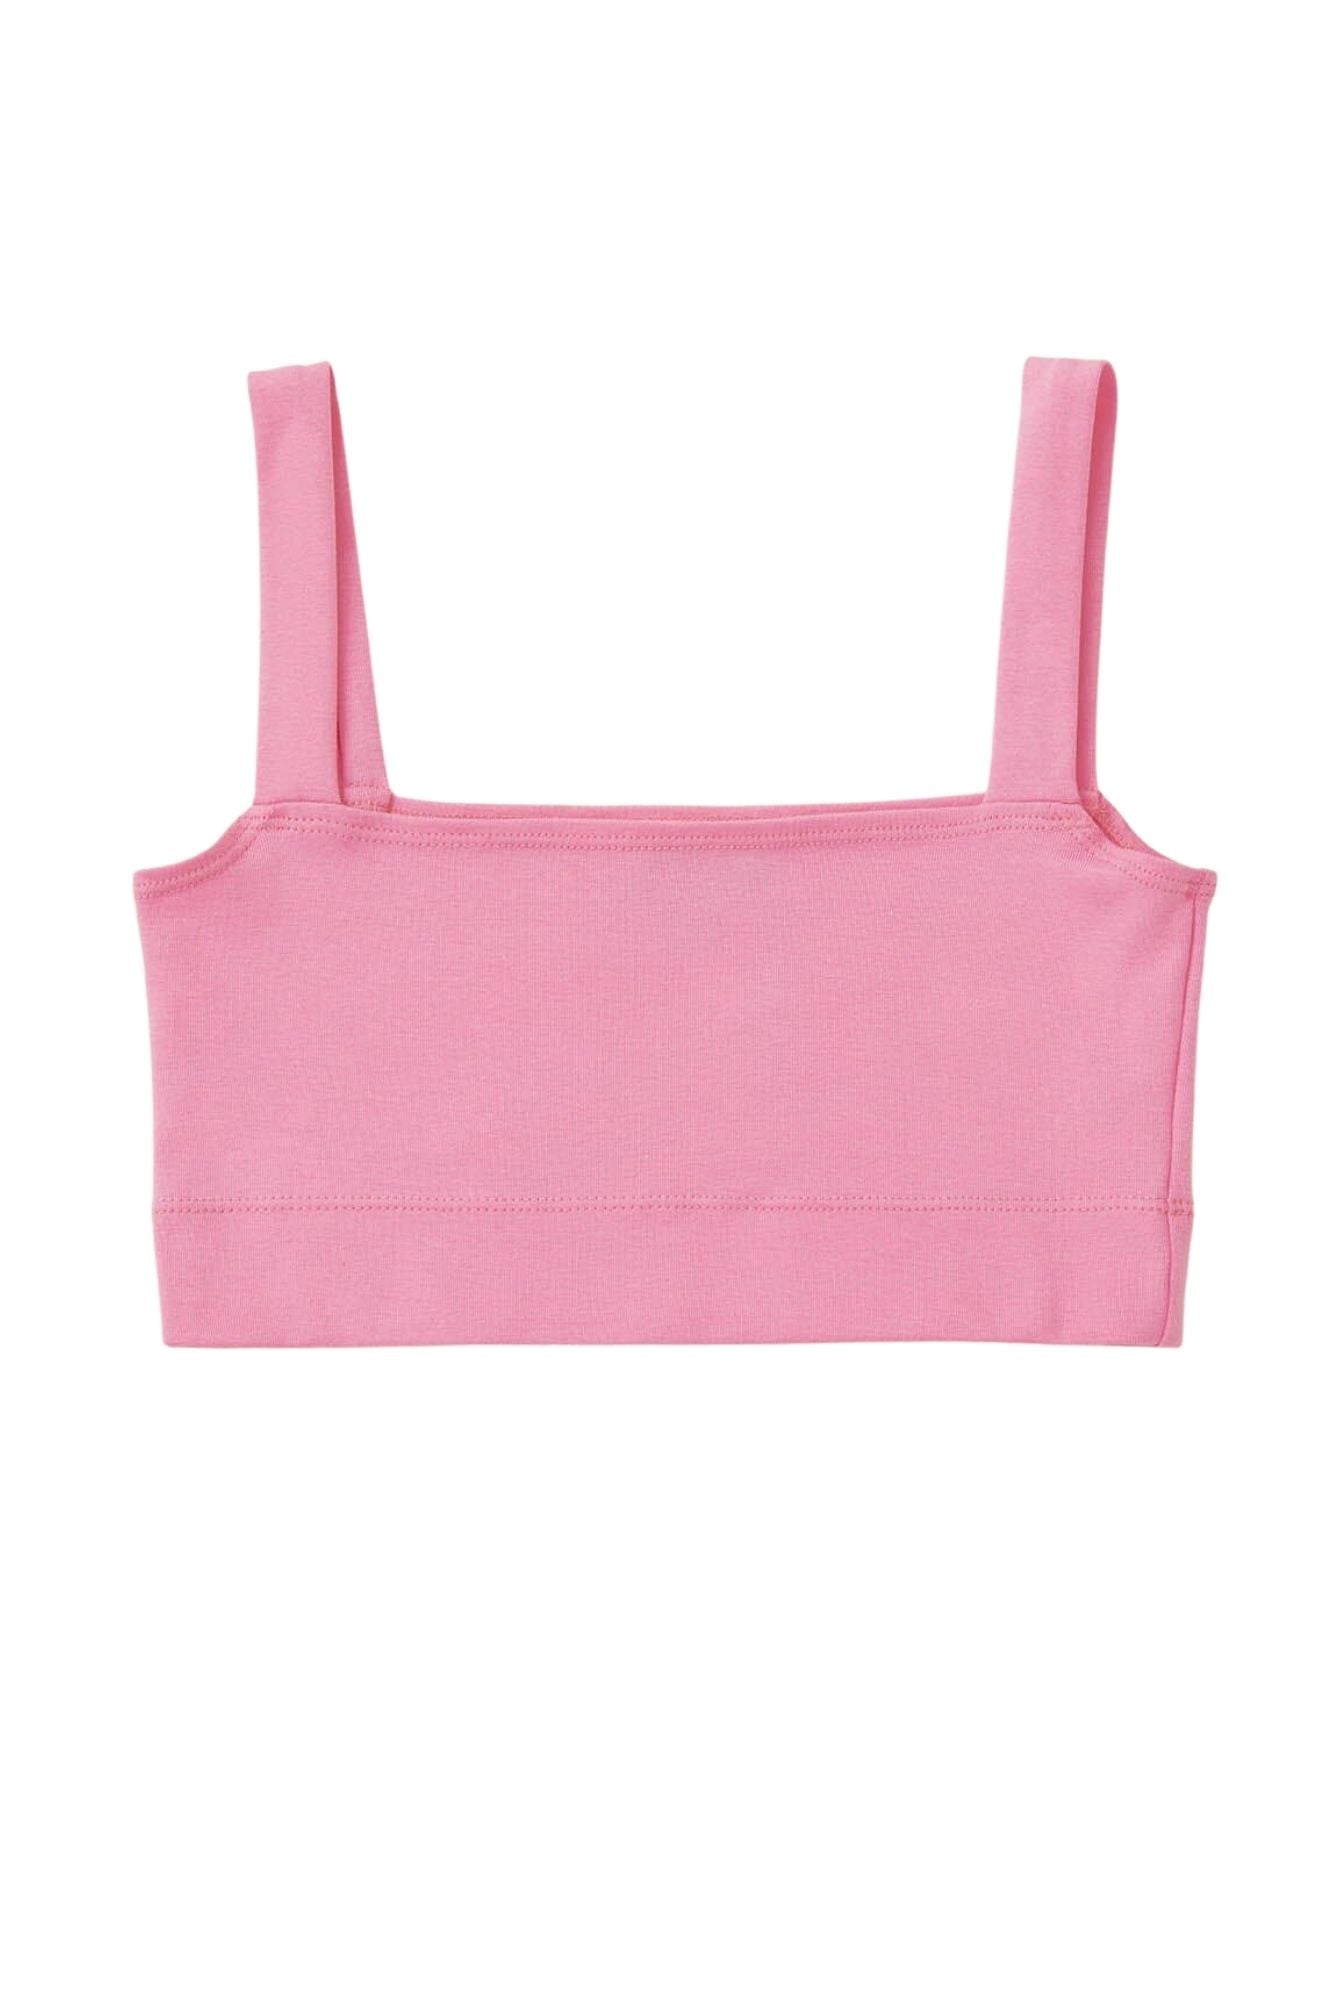 Zahra Comfort Maternity Bralette in the color pink